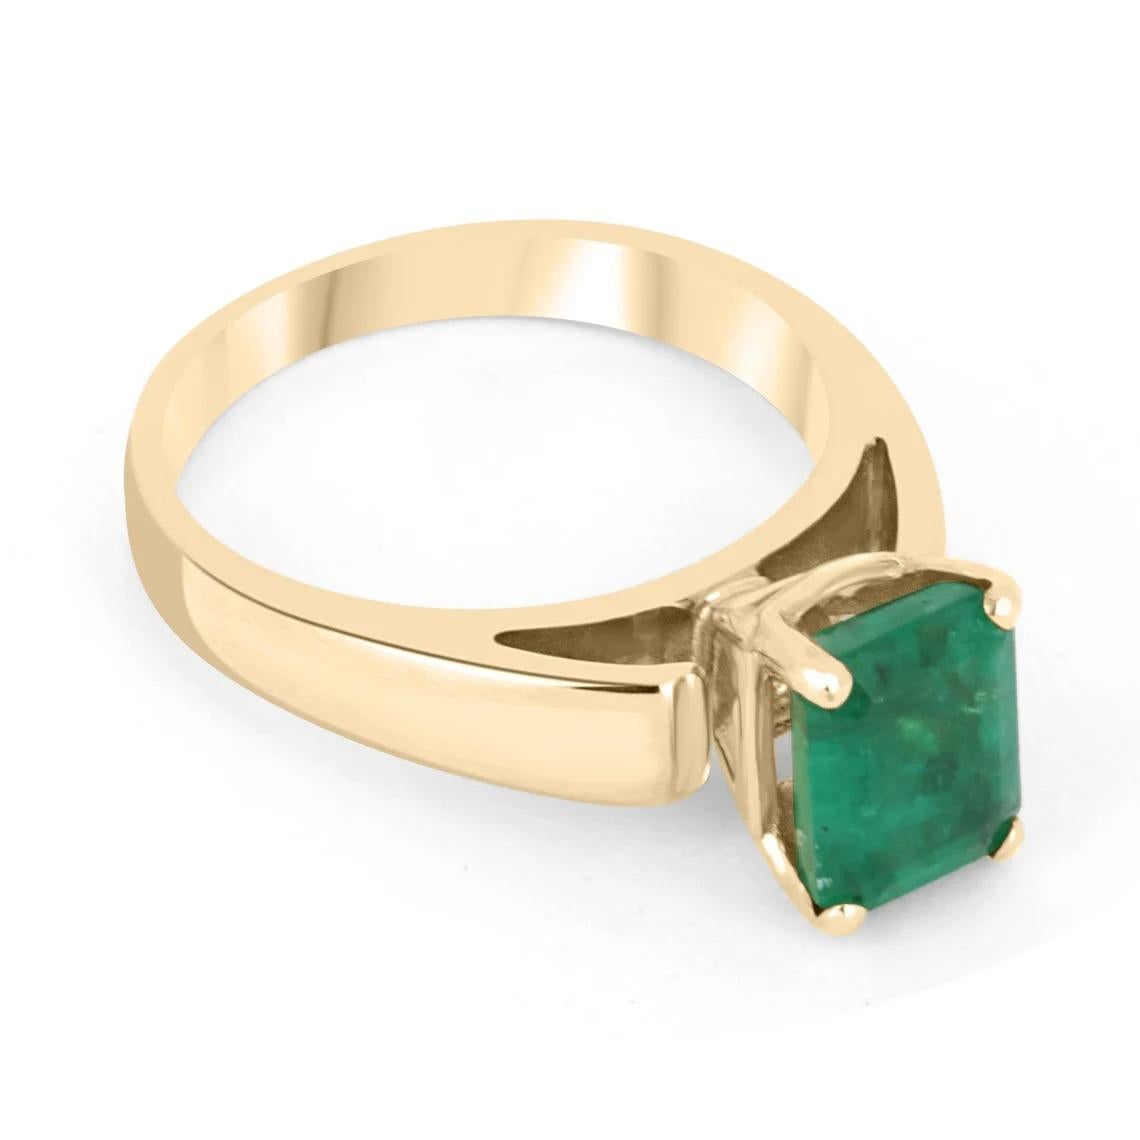 Displayed is a classic Colombian emerald solitaire emerald-cut engagement or right-hand ring in 18K yellow gold. This gorgeous solitaire ring carries a full 1.88-carat emerald in a four-prong setting. Fully faceted, this gemstone showcases excellent